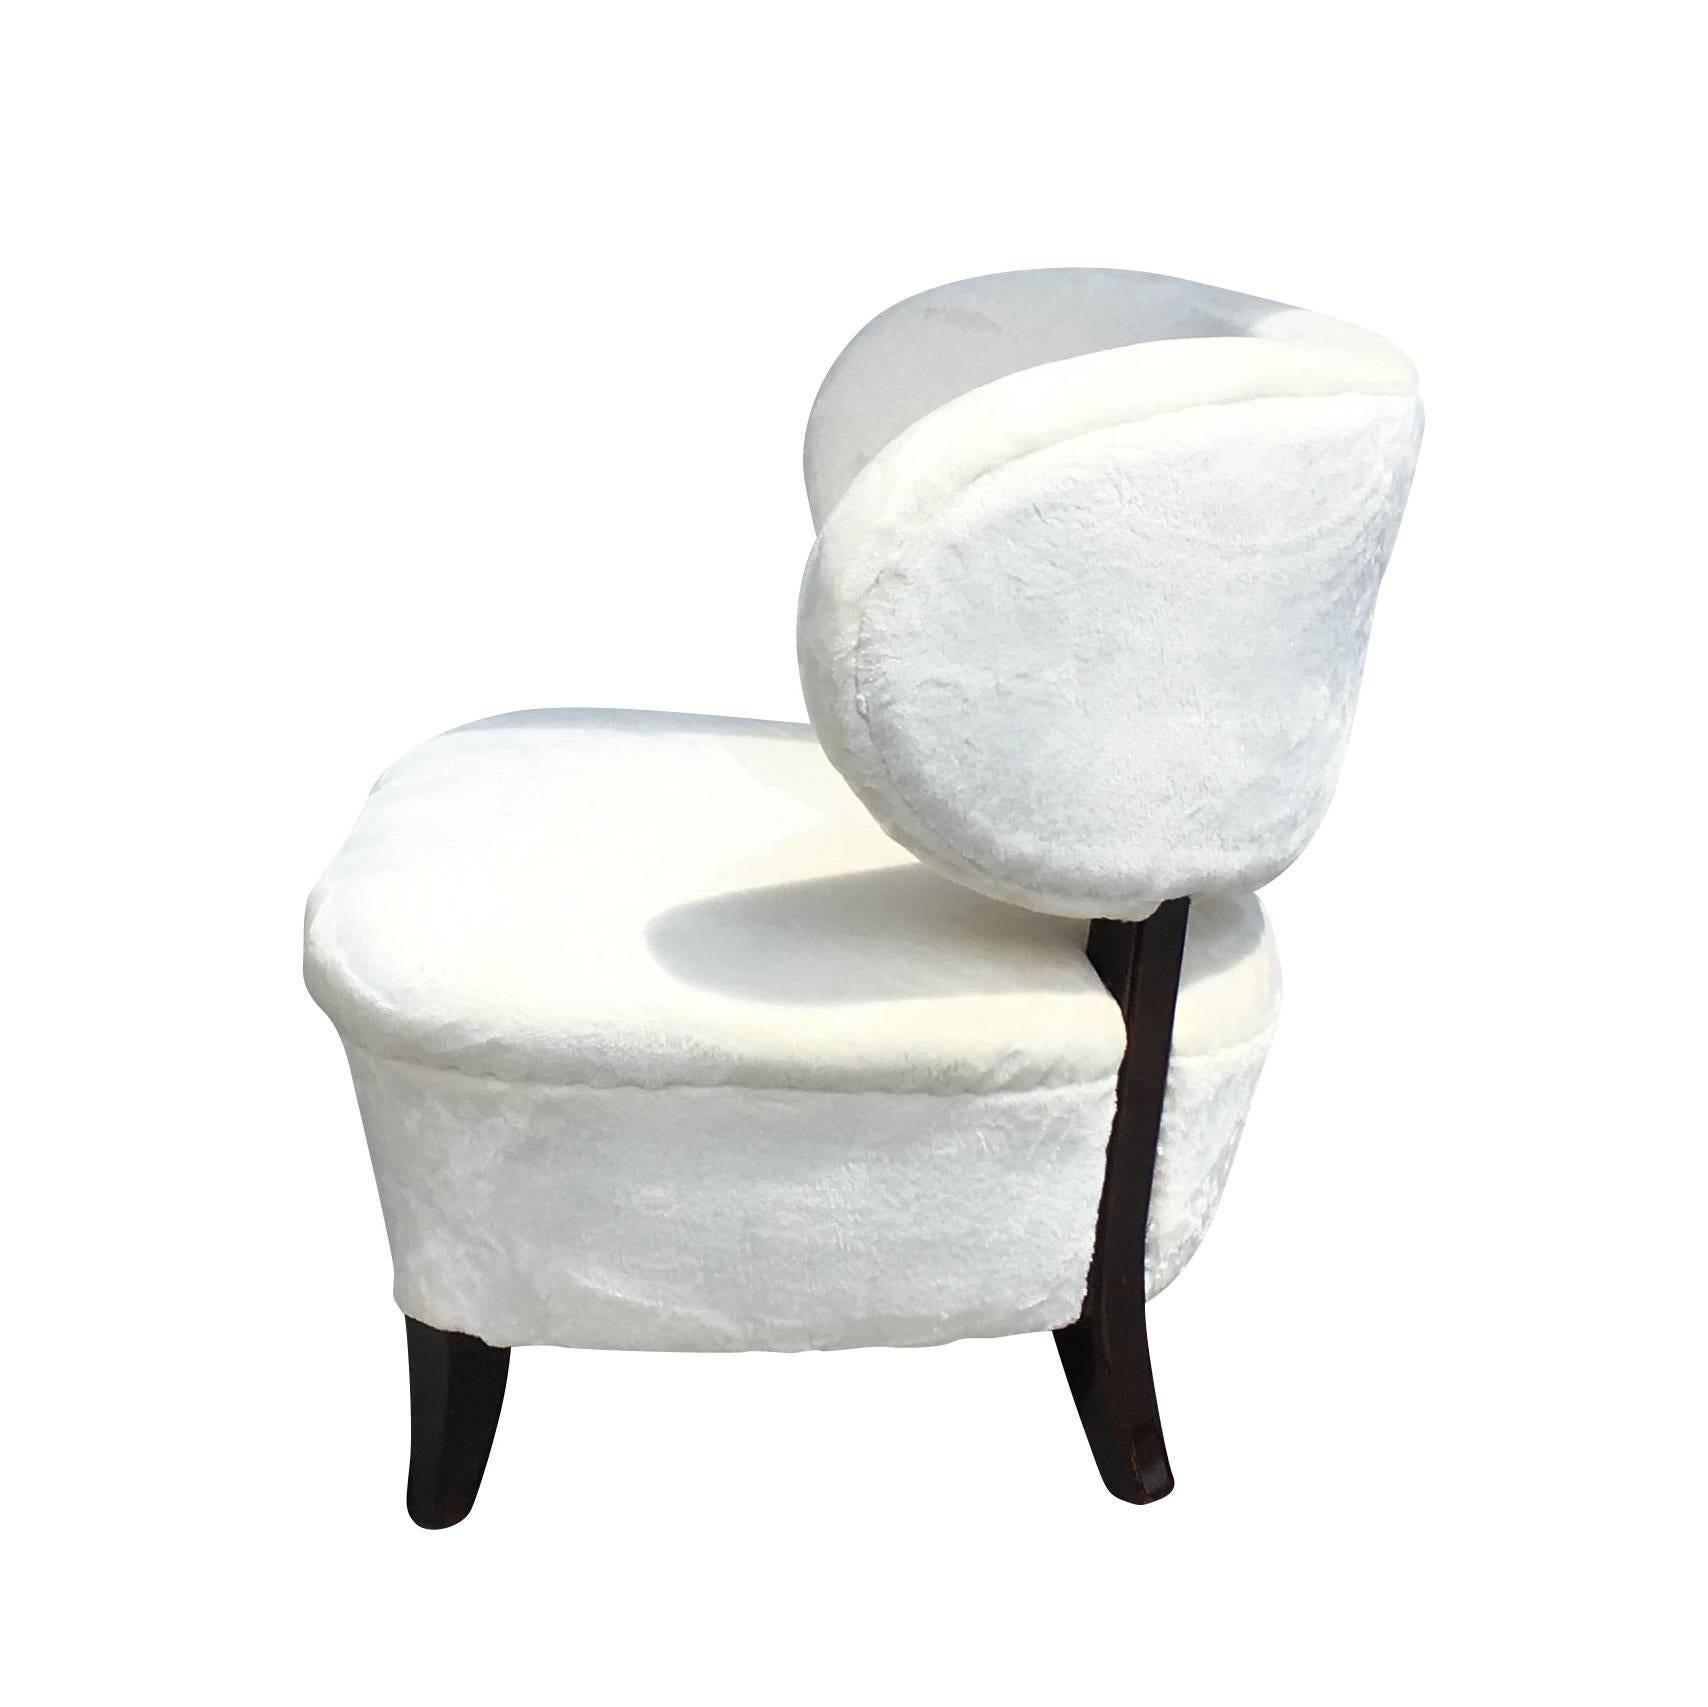 A vintage Swedish Art Deco lounge chair in good condition, designed by Otto Schulz. Features a curved back, studs, mahogany legs and has been reupholstered in a white Pierre Frey fabric. Wear consistent with age and use, circa 1930, Sweden,